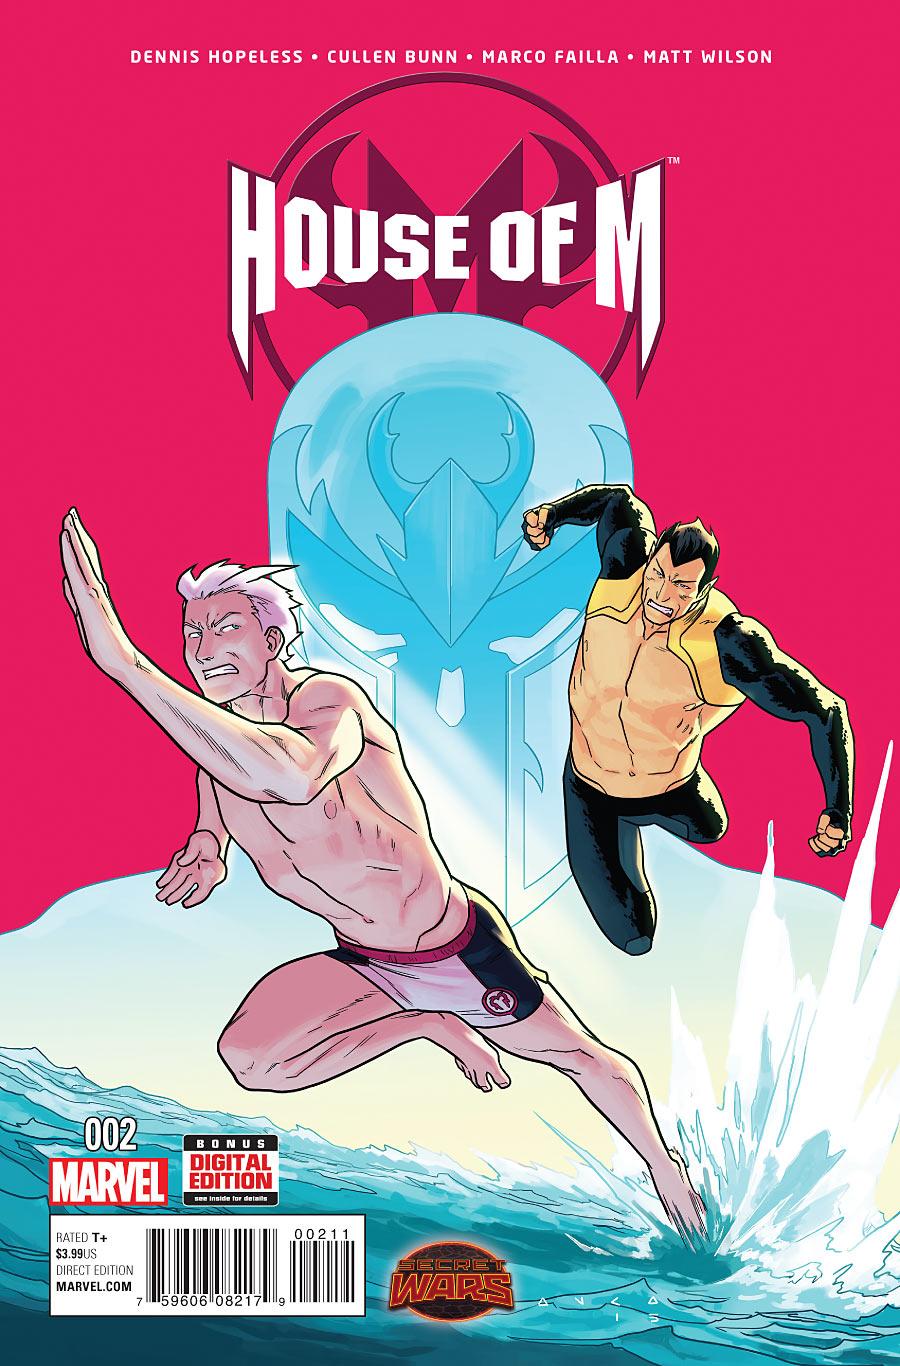 House of M Vol. 2 #2